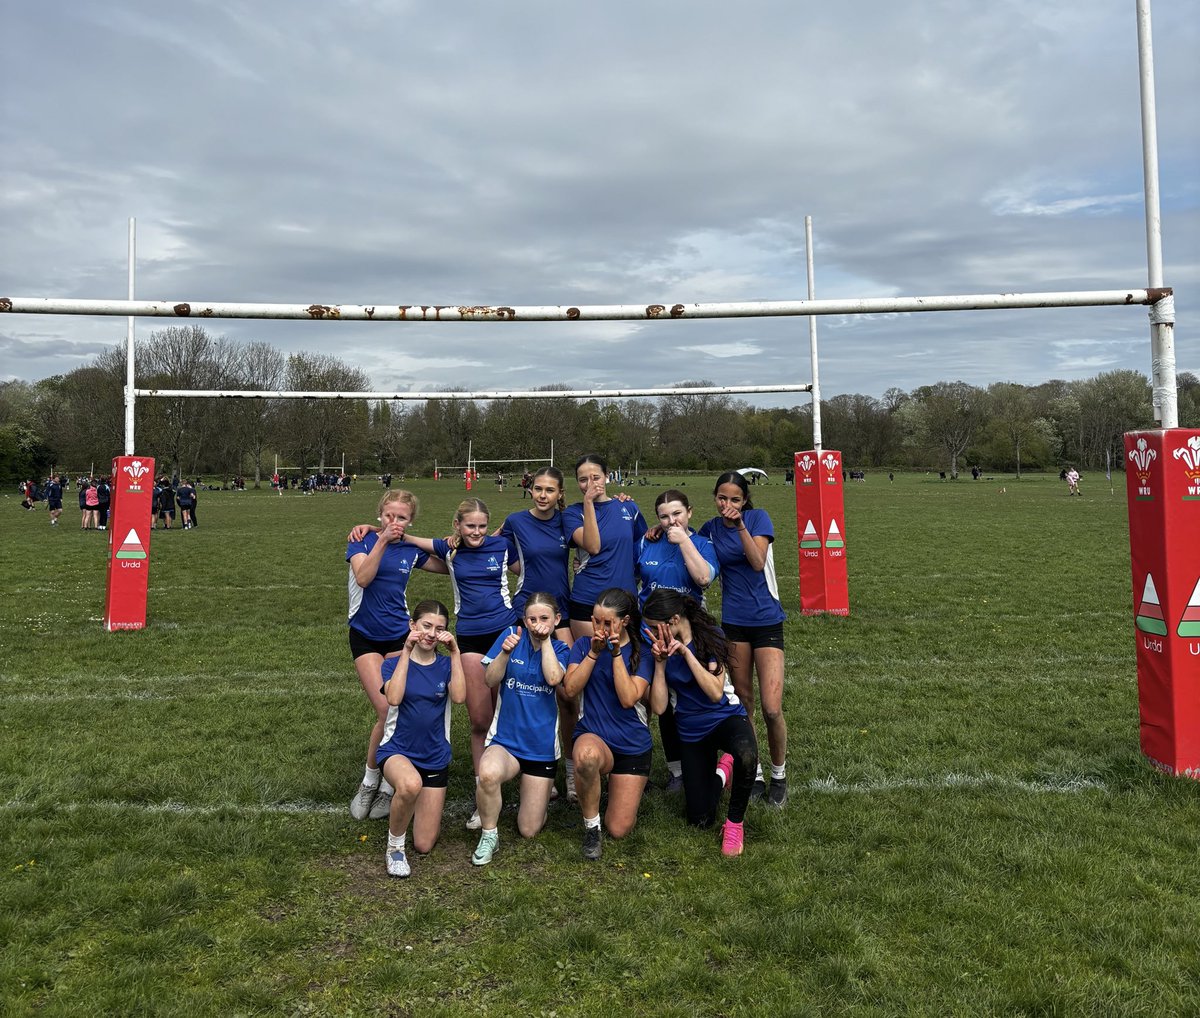 Year 8 girls - Urdd 7s Incredibly proud of these girls yesterday who competed in their first ever Urdd 7s tournament. There was plenty of learning throughout the day and some brilliant running rugby on show! @LHScardiff @LlanishenHighPE